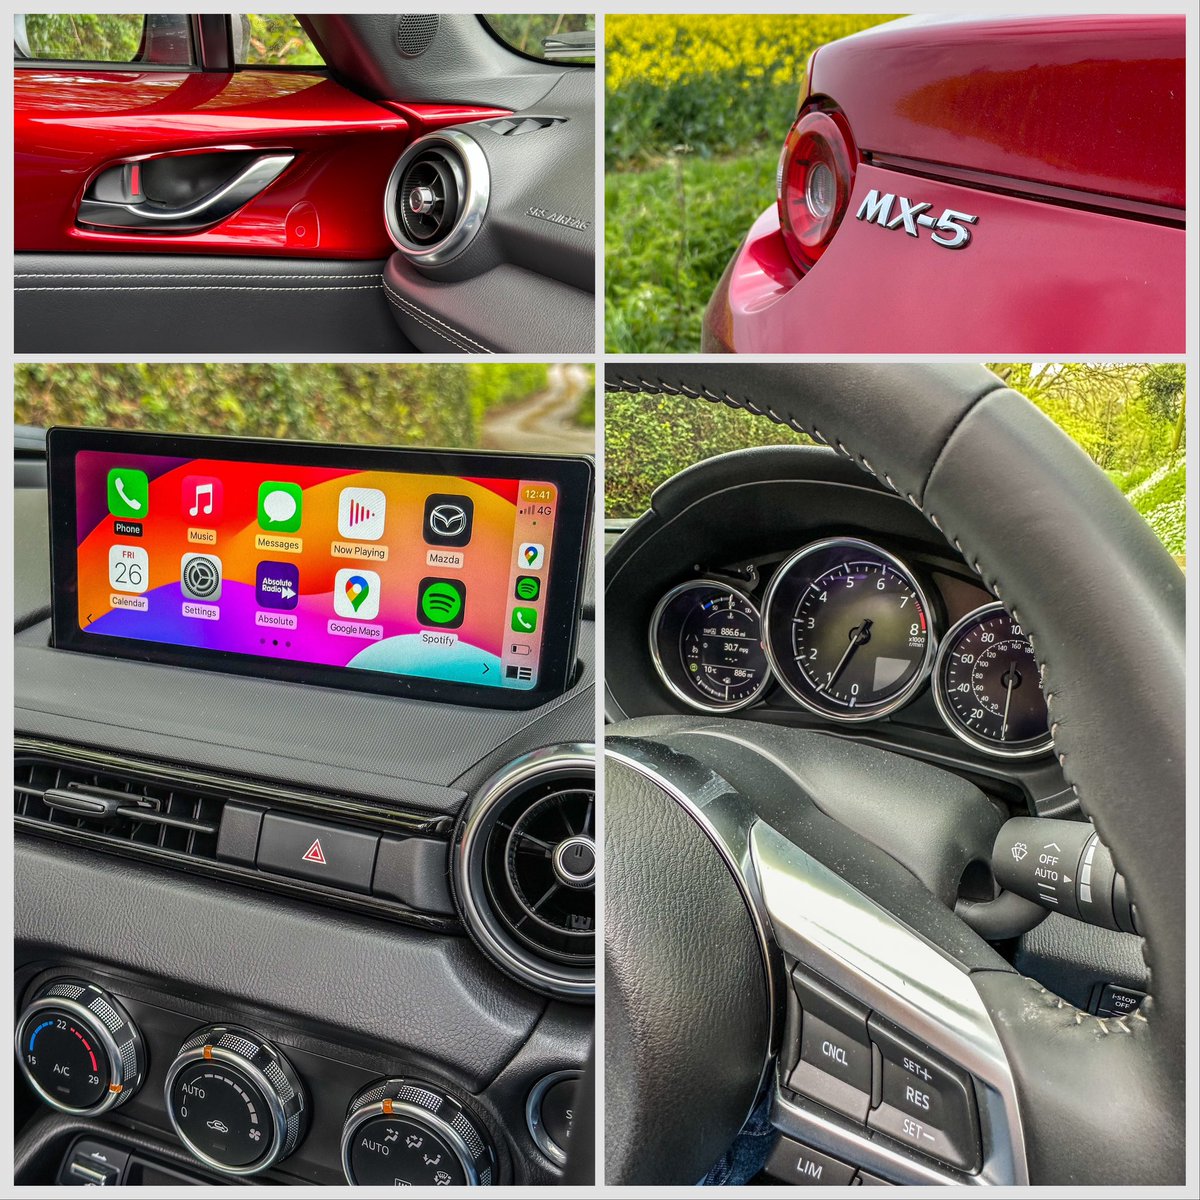 I haven’t driven a new car for a while so my lovely colleagues at @ParkersCars loaned me this MX-5 RF. Having switched off the annoying bing-bong noises and sussed out the screen controls (you don’t get any of this in a 2CV!), so far, so good - crucially, it feels like an MX-5.